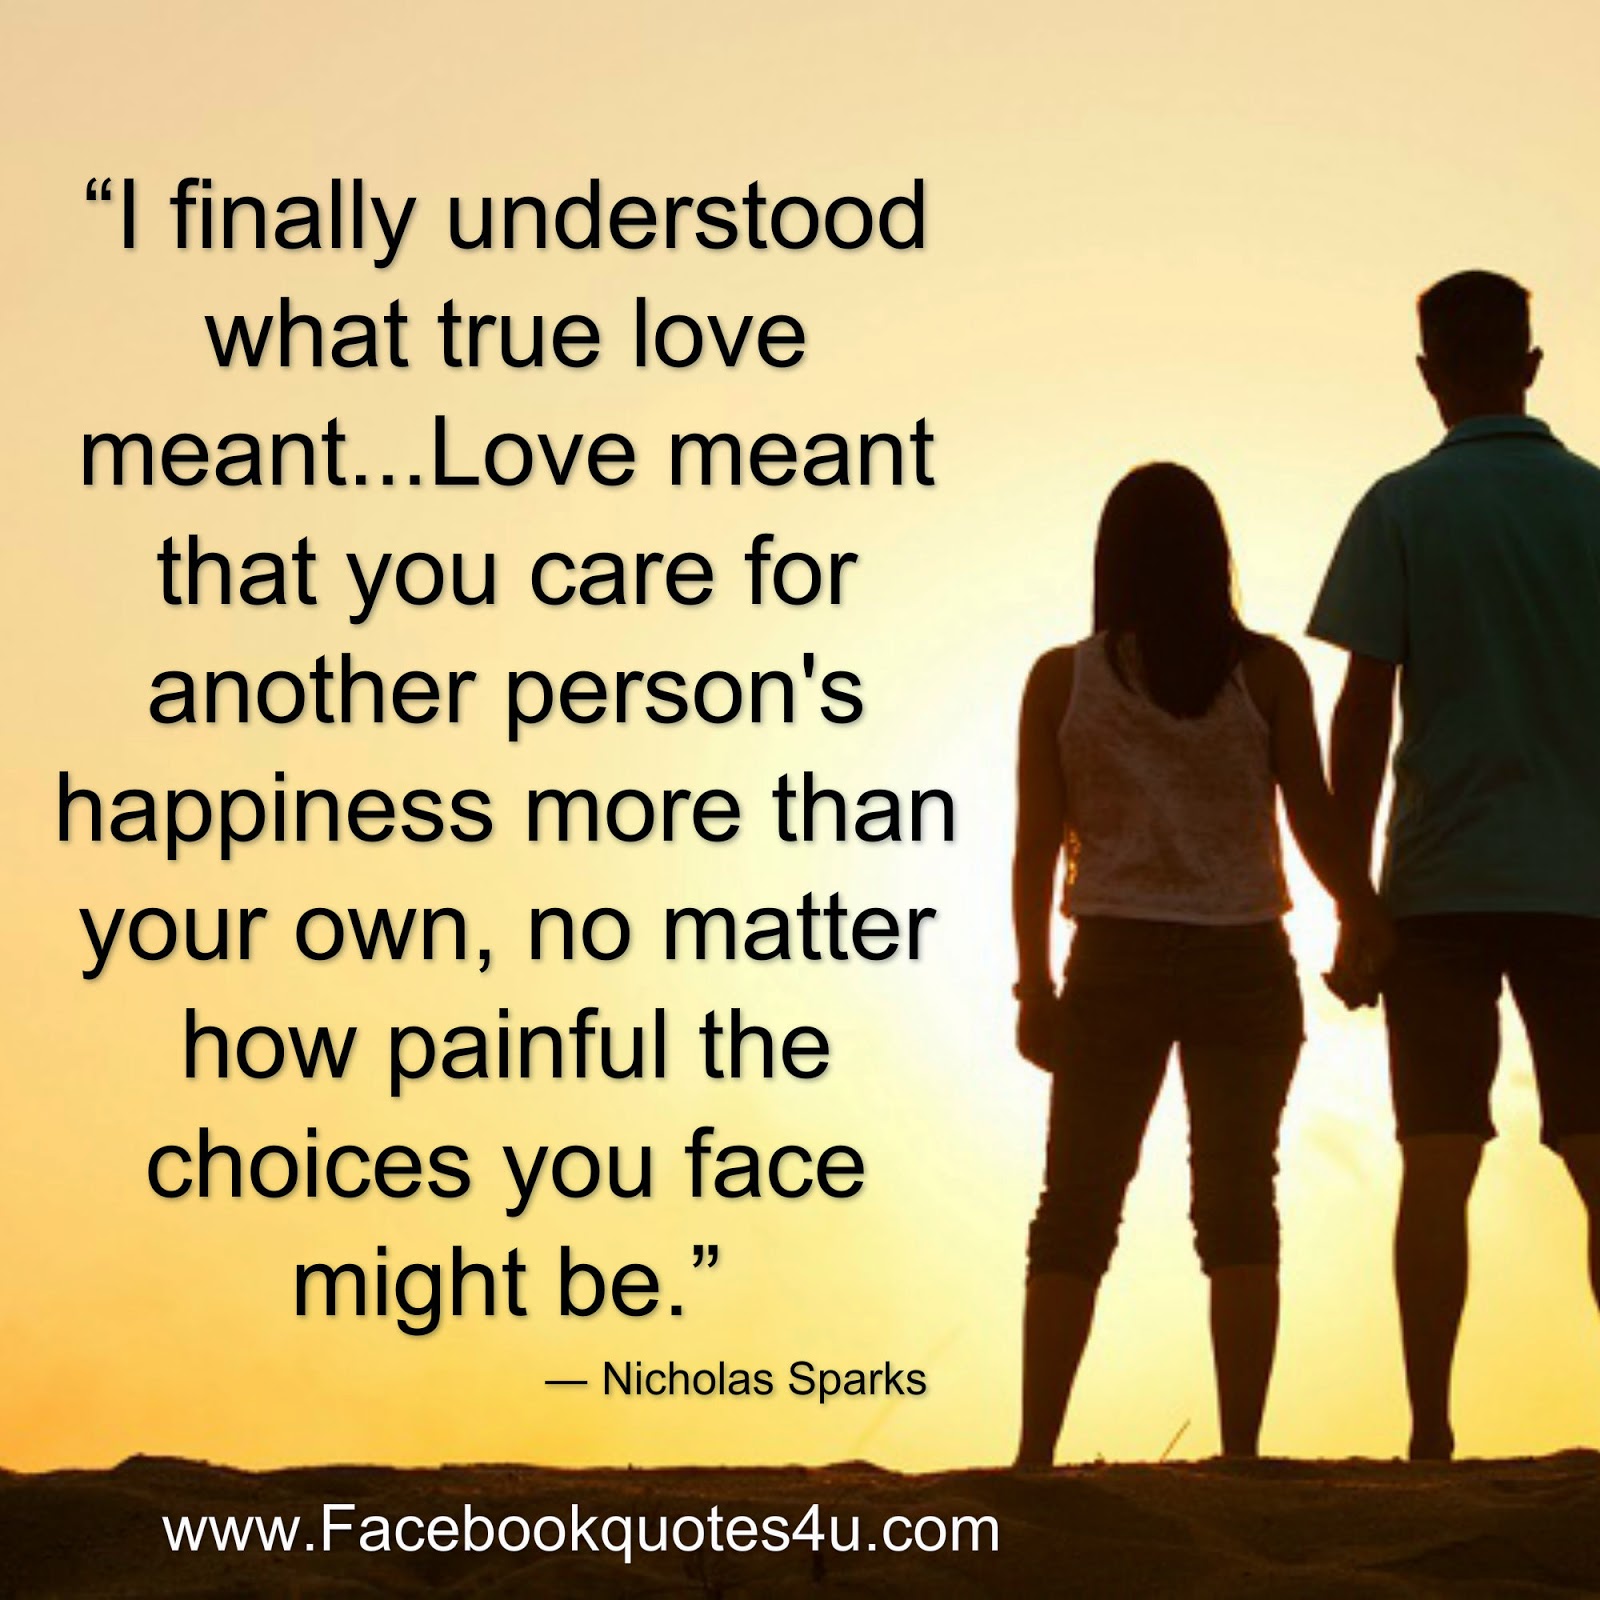 Mesmerizing Quotes I finally understood what true love meant. 